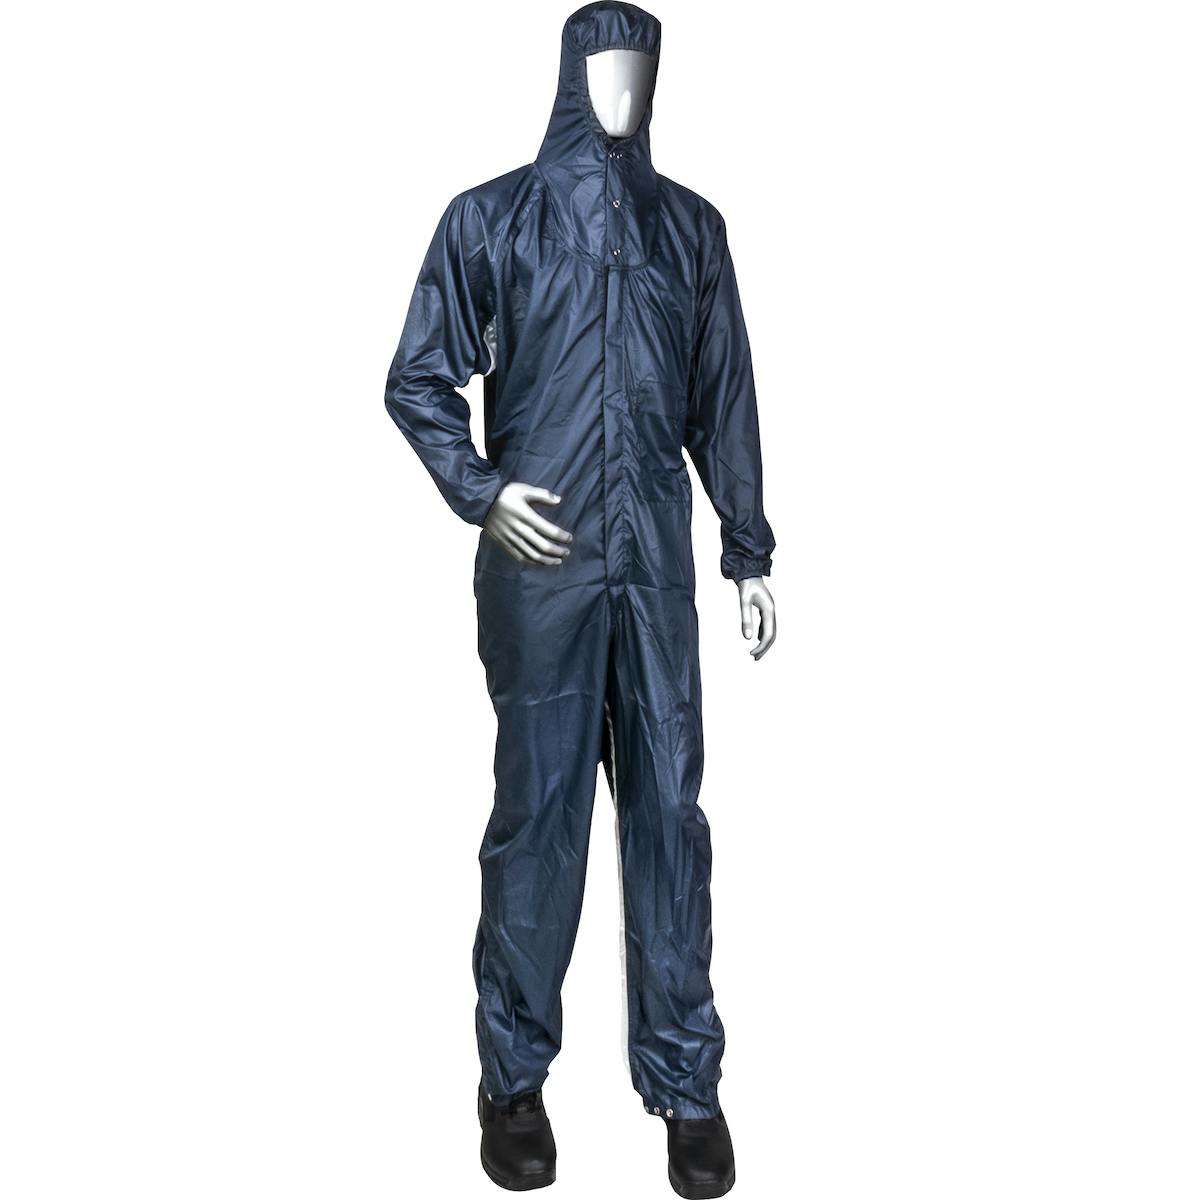 Spray Barrier Paint / Powder Coating Hooded Coverall, Navy (CCNQH2-26NV)